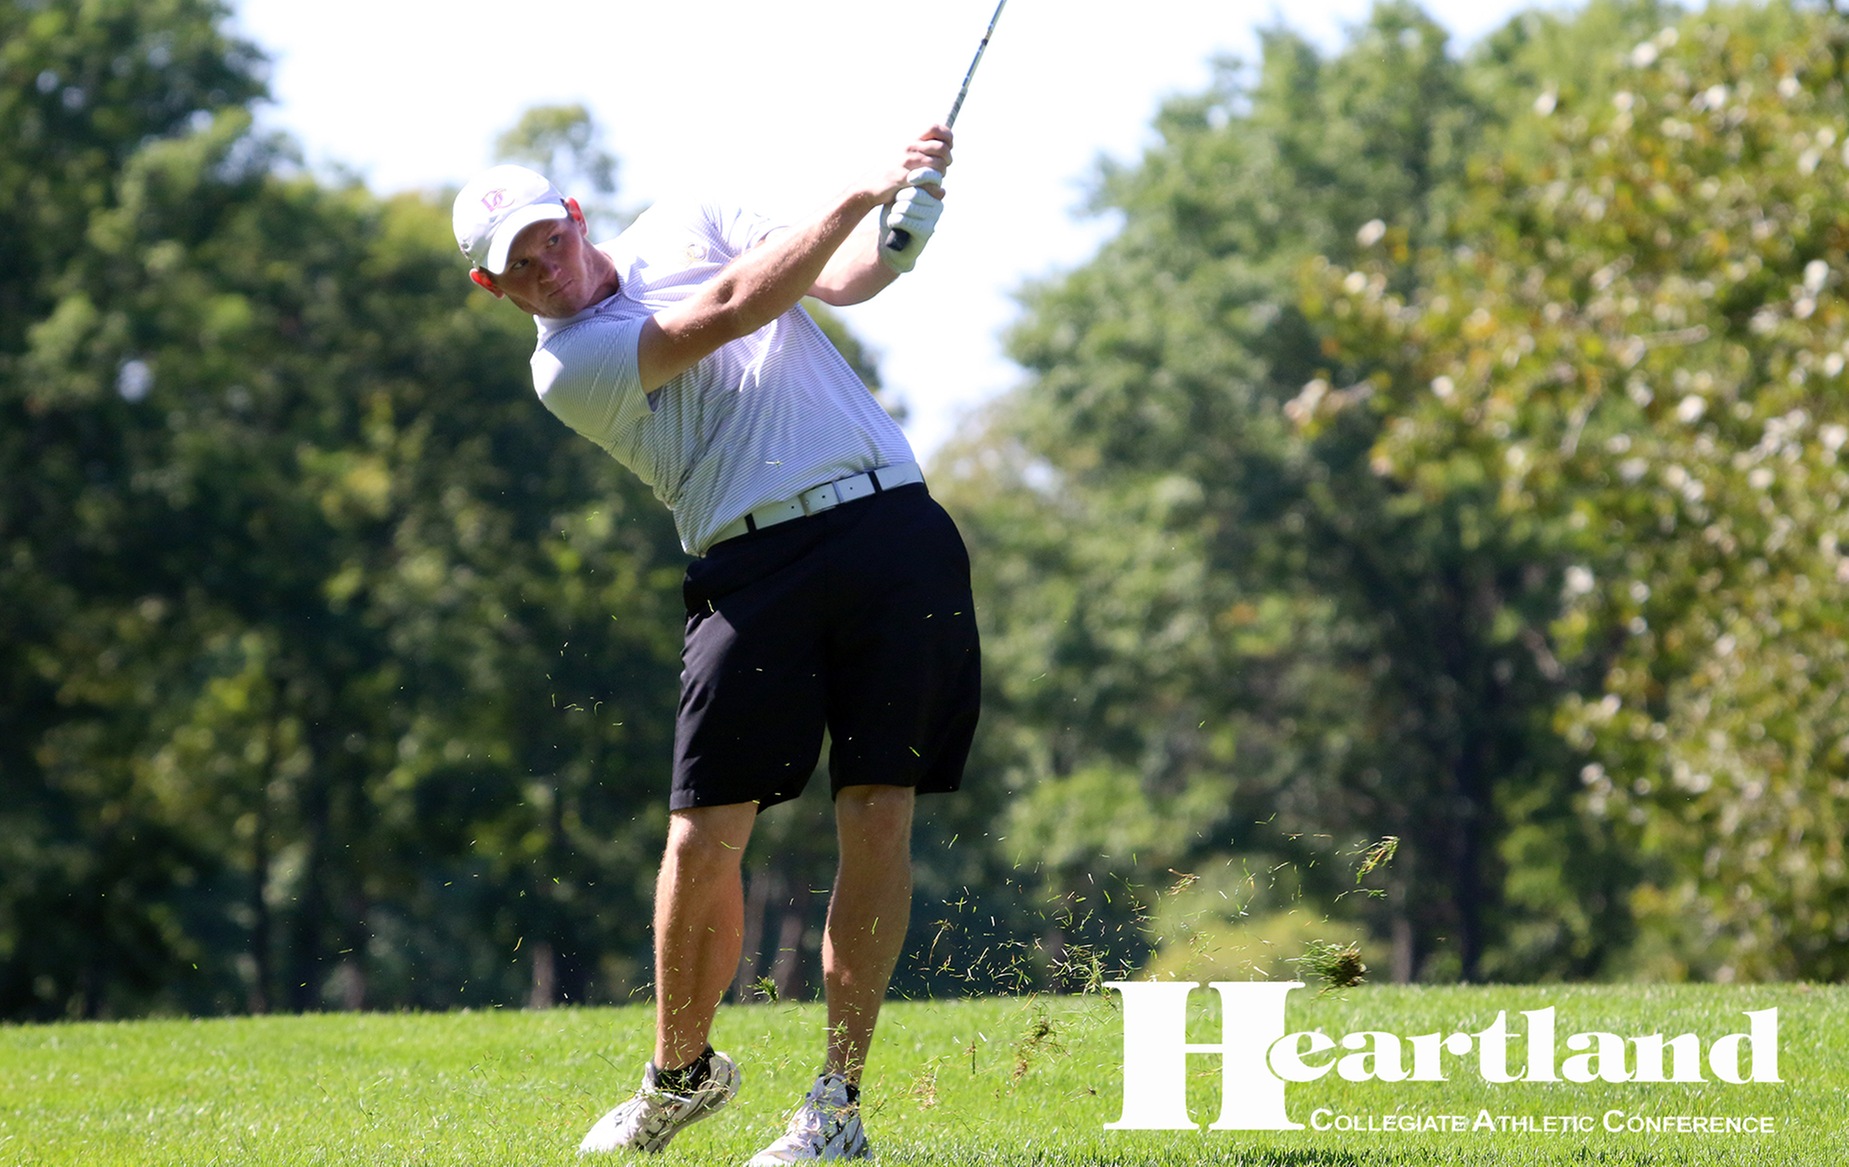 Alex Miday Named HCAC Golfer of the Week